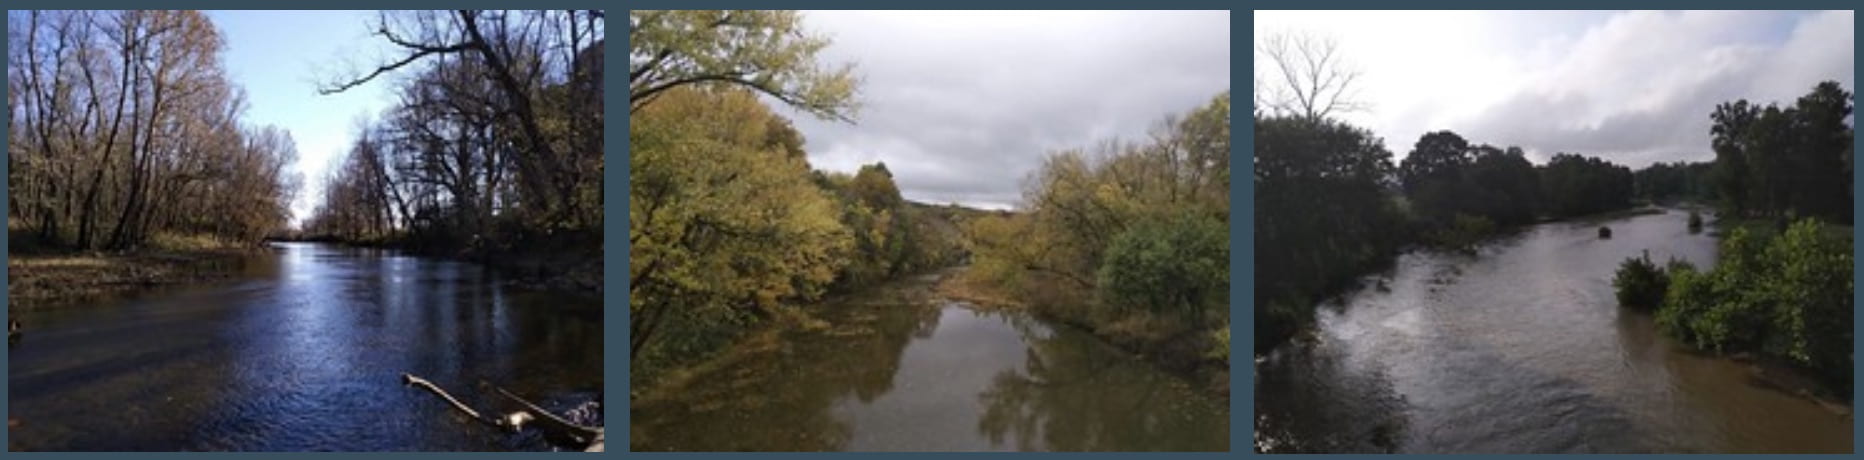 Monitoring in the Upper White and Upper Illinois River Watersheds